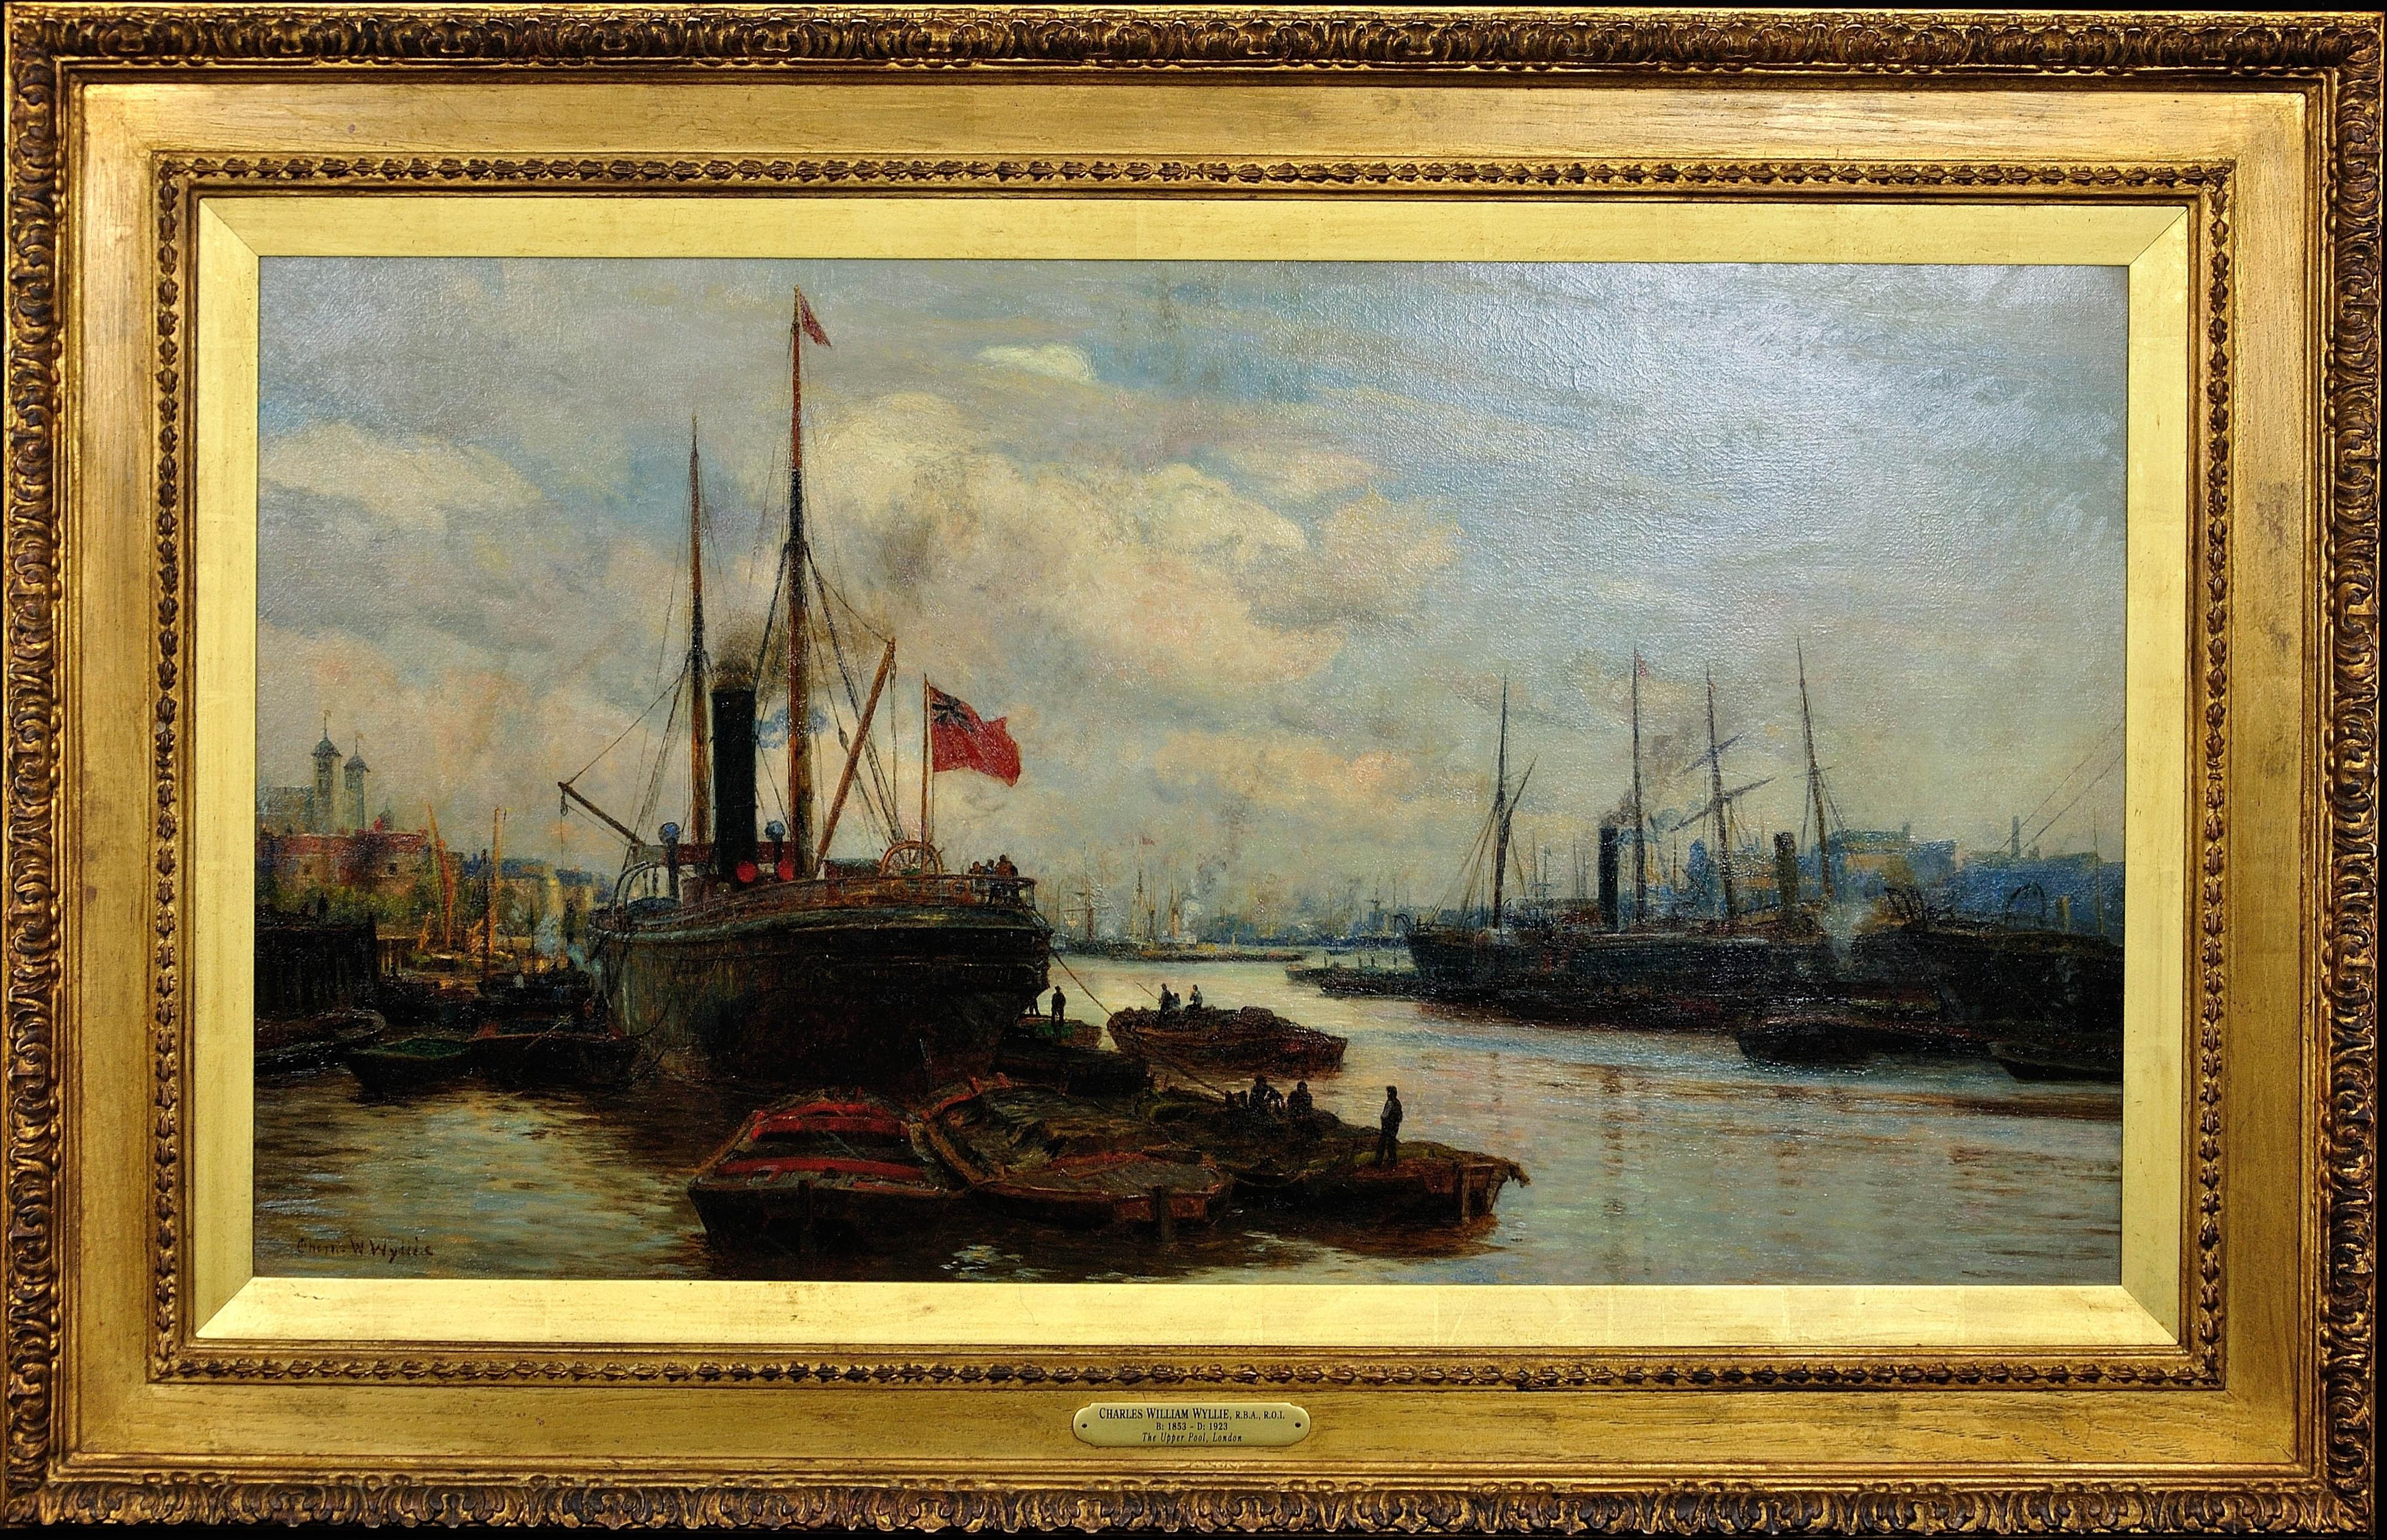 Charles William Wyllie Landscape Painting - The Upper Pool of London. River Thames. Maritime Marine Oil Painting. Wyllie.